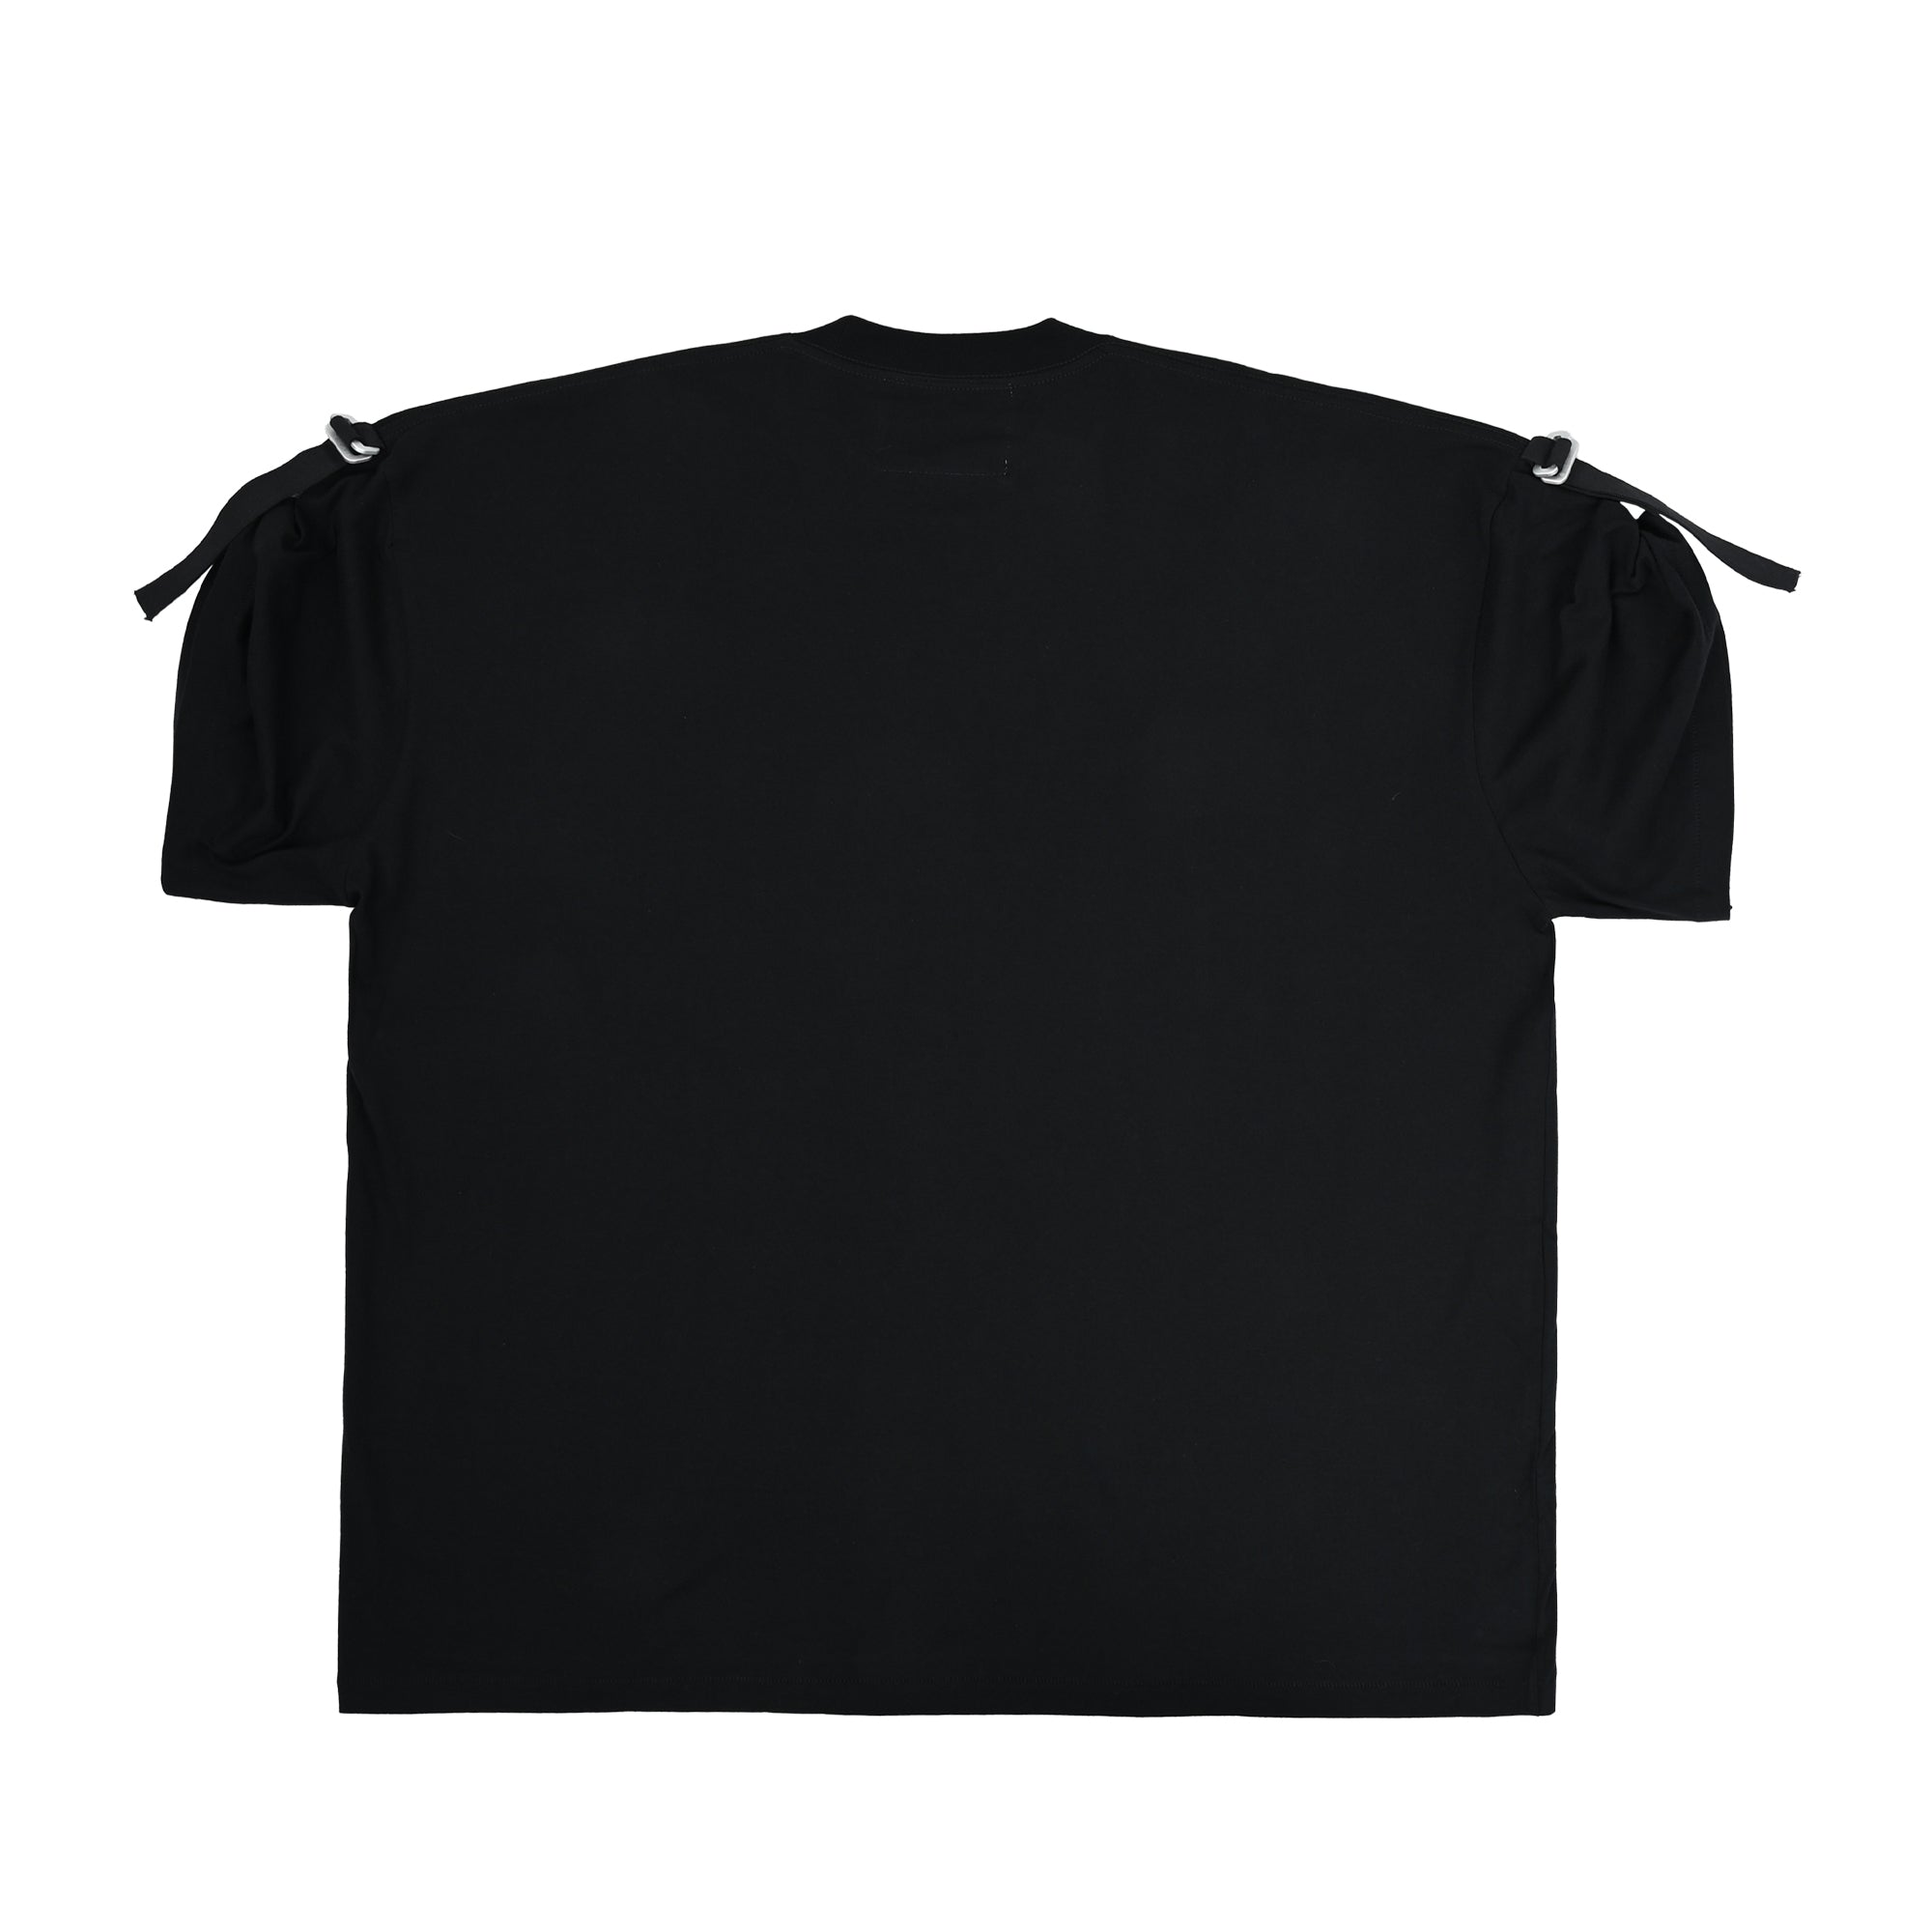 The Salvages 'Sublime' Form & Function D-Ring OS T-Shirt in Black